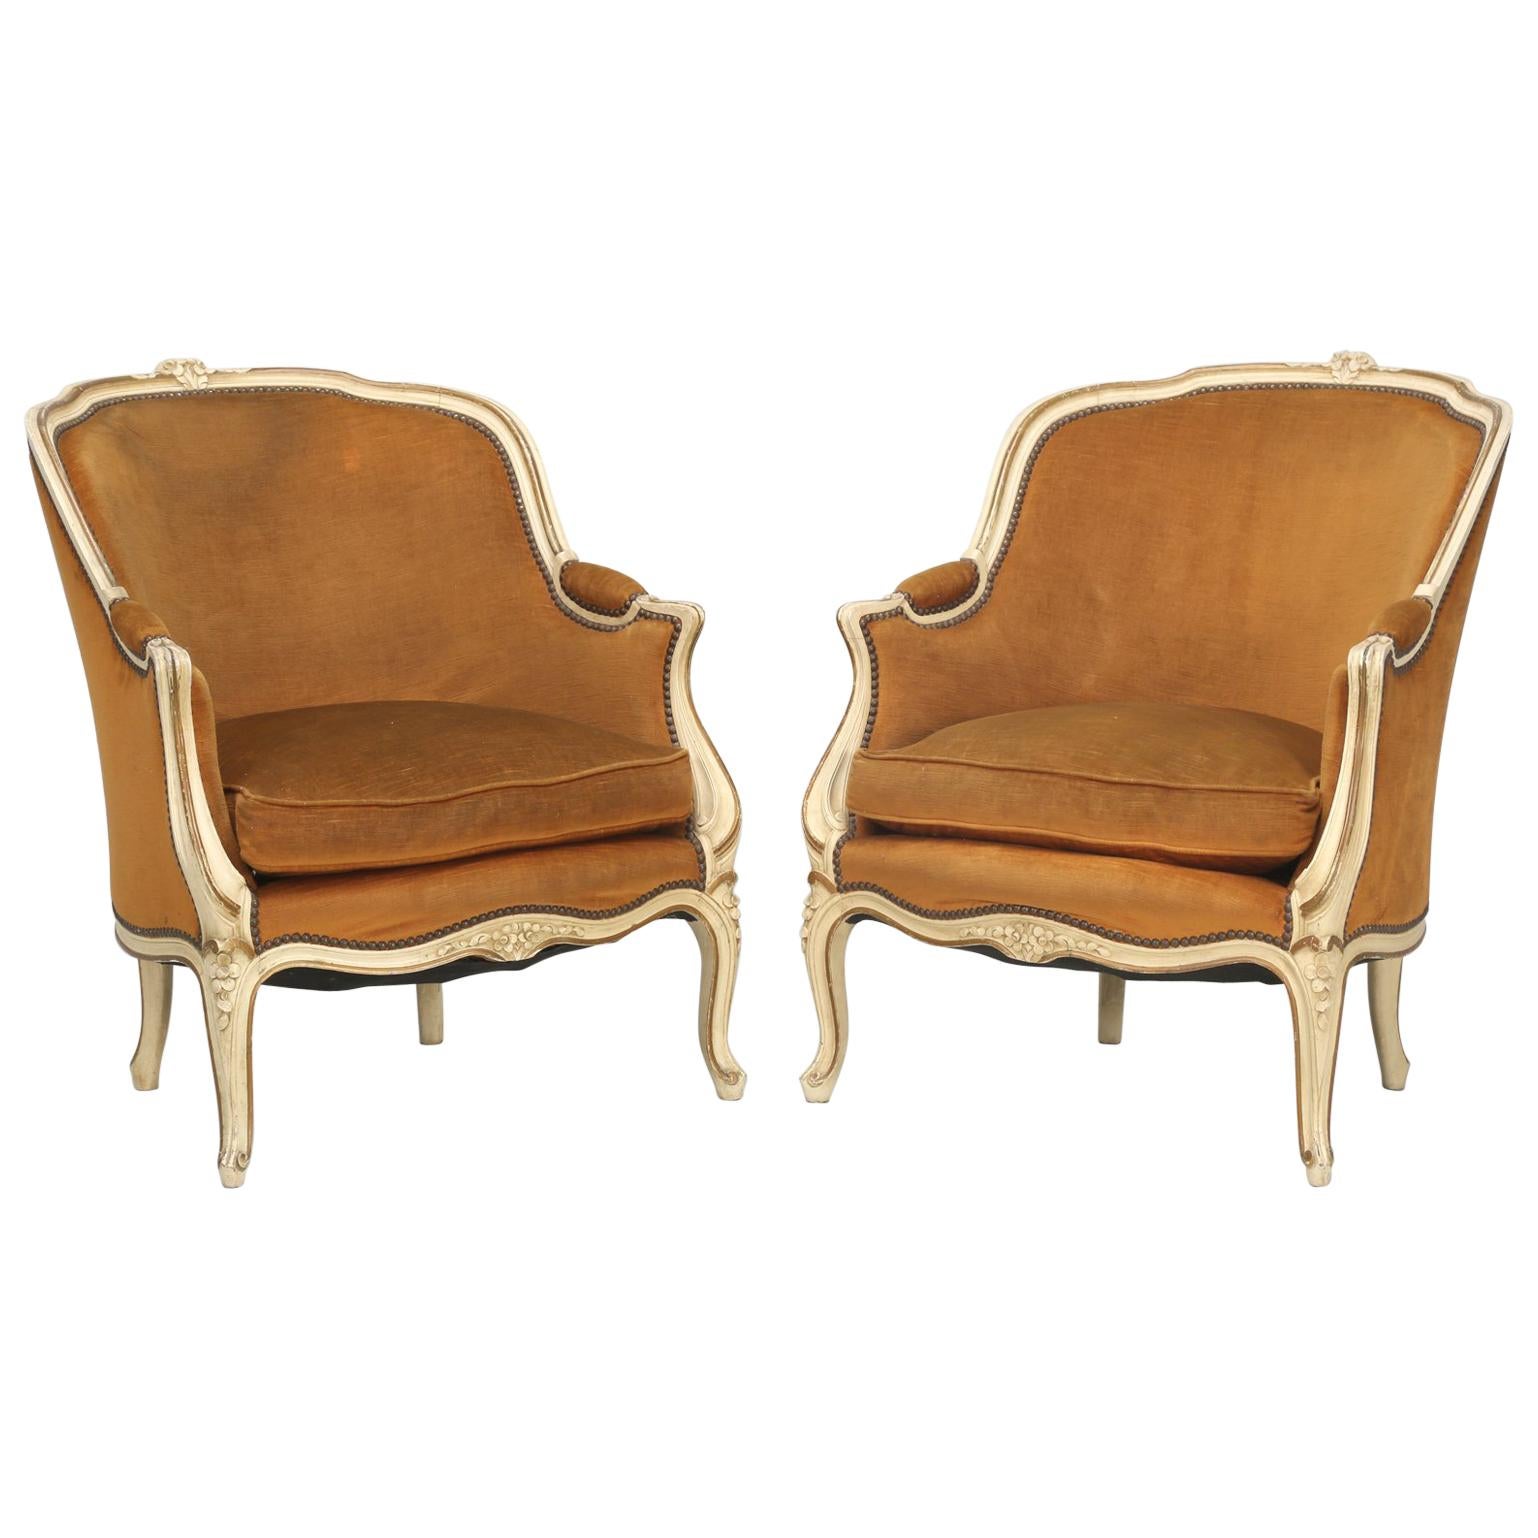 Pair of Vintage French Bergère Chairs in Their Original Paint